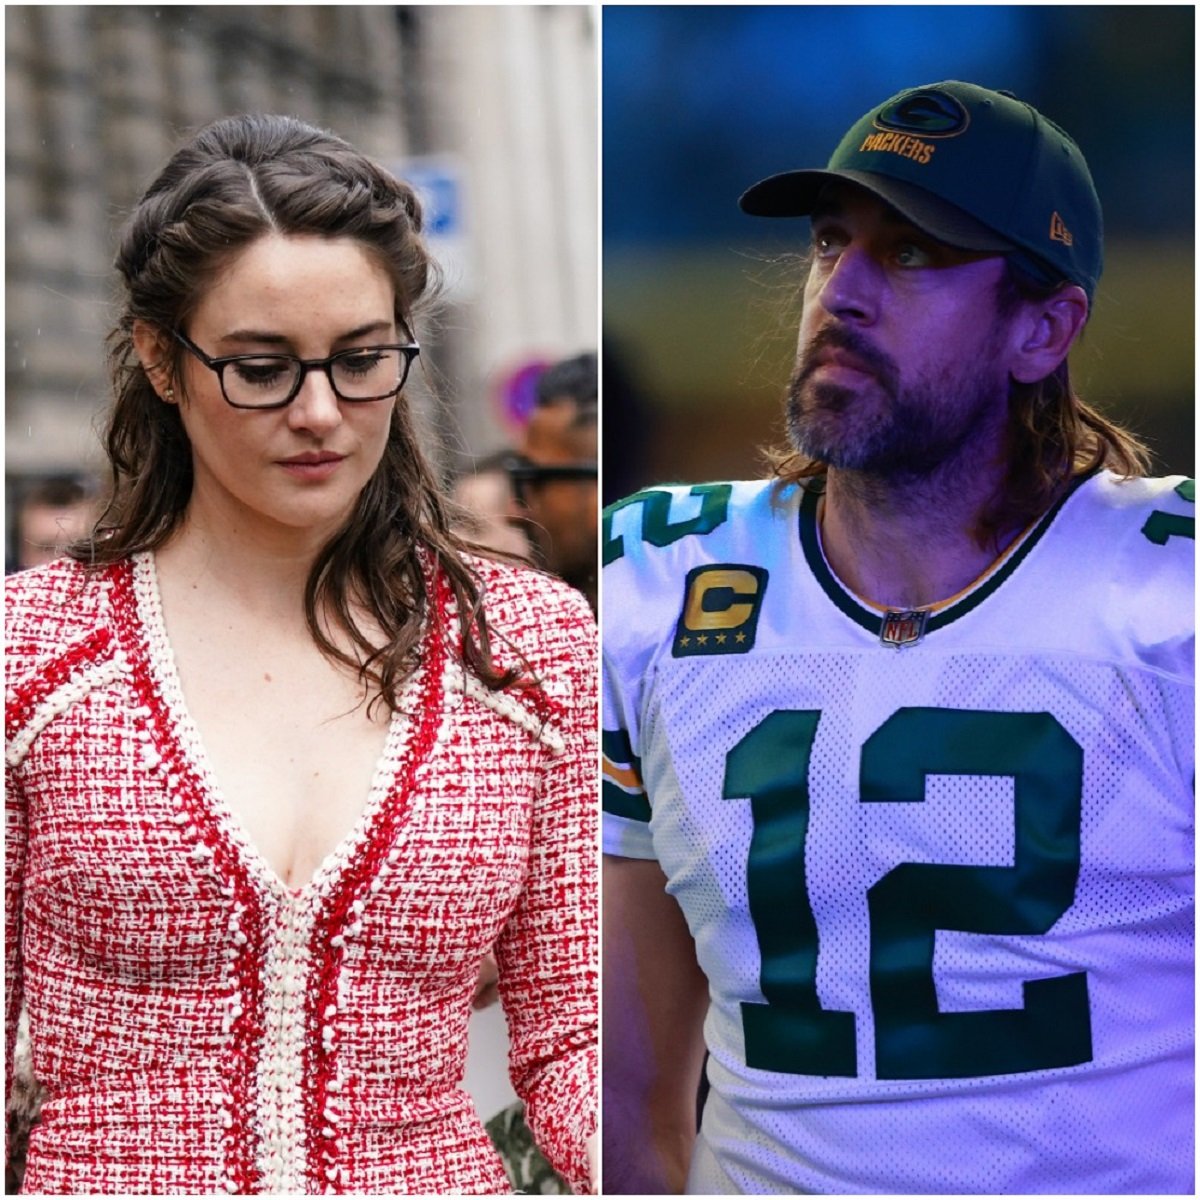 Aaron Rodgers’ New Girlfriend Appears to Be Taunting His Ex-Shailene Woodley